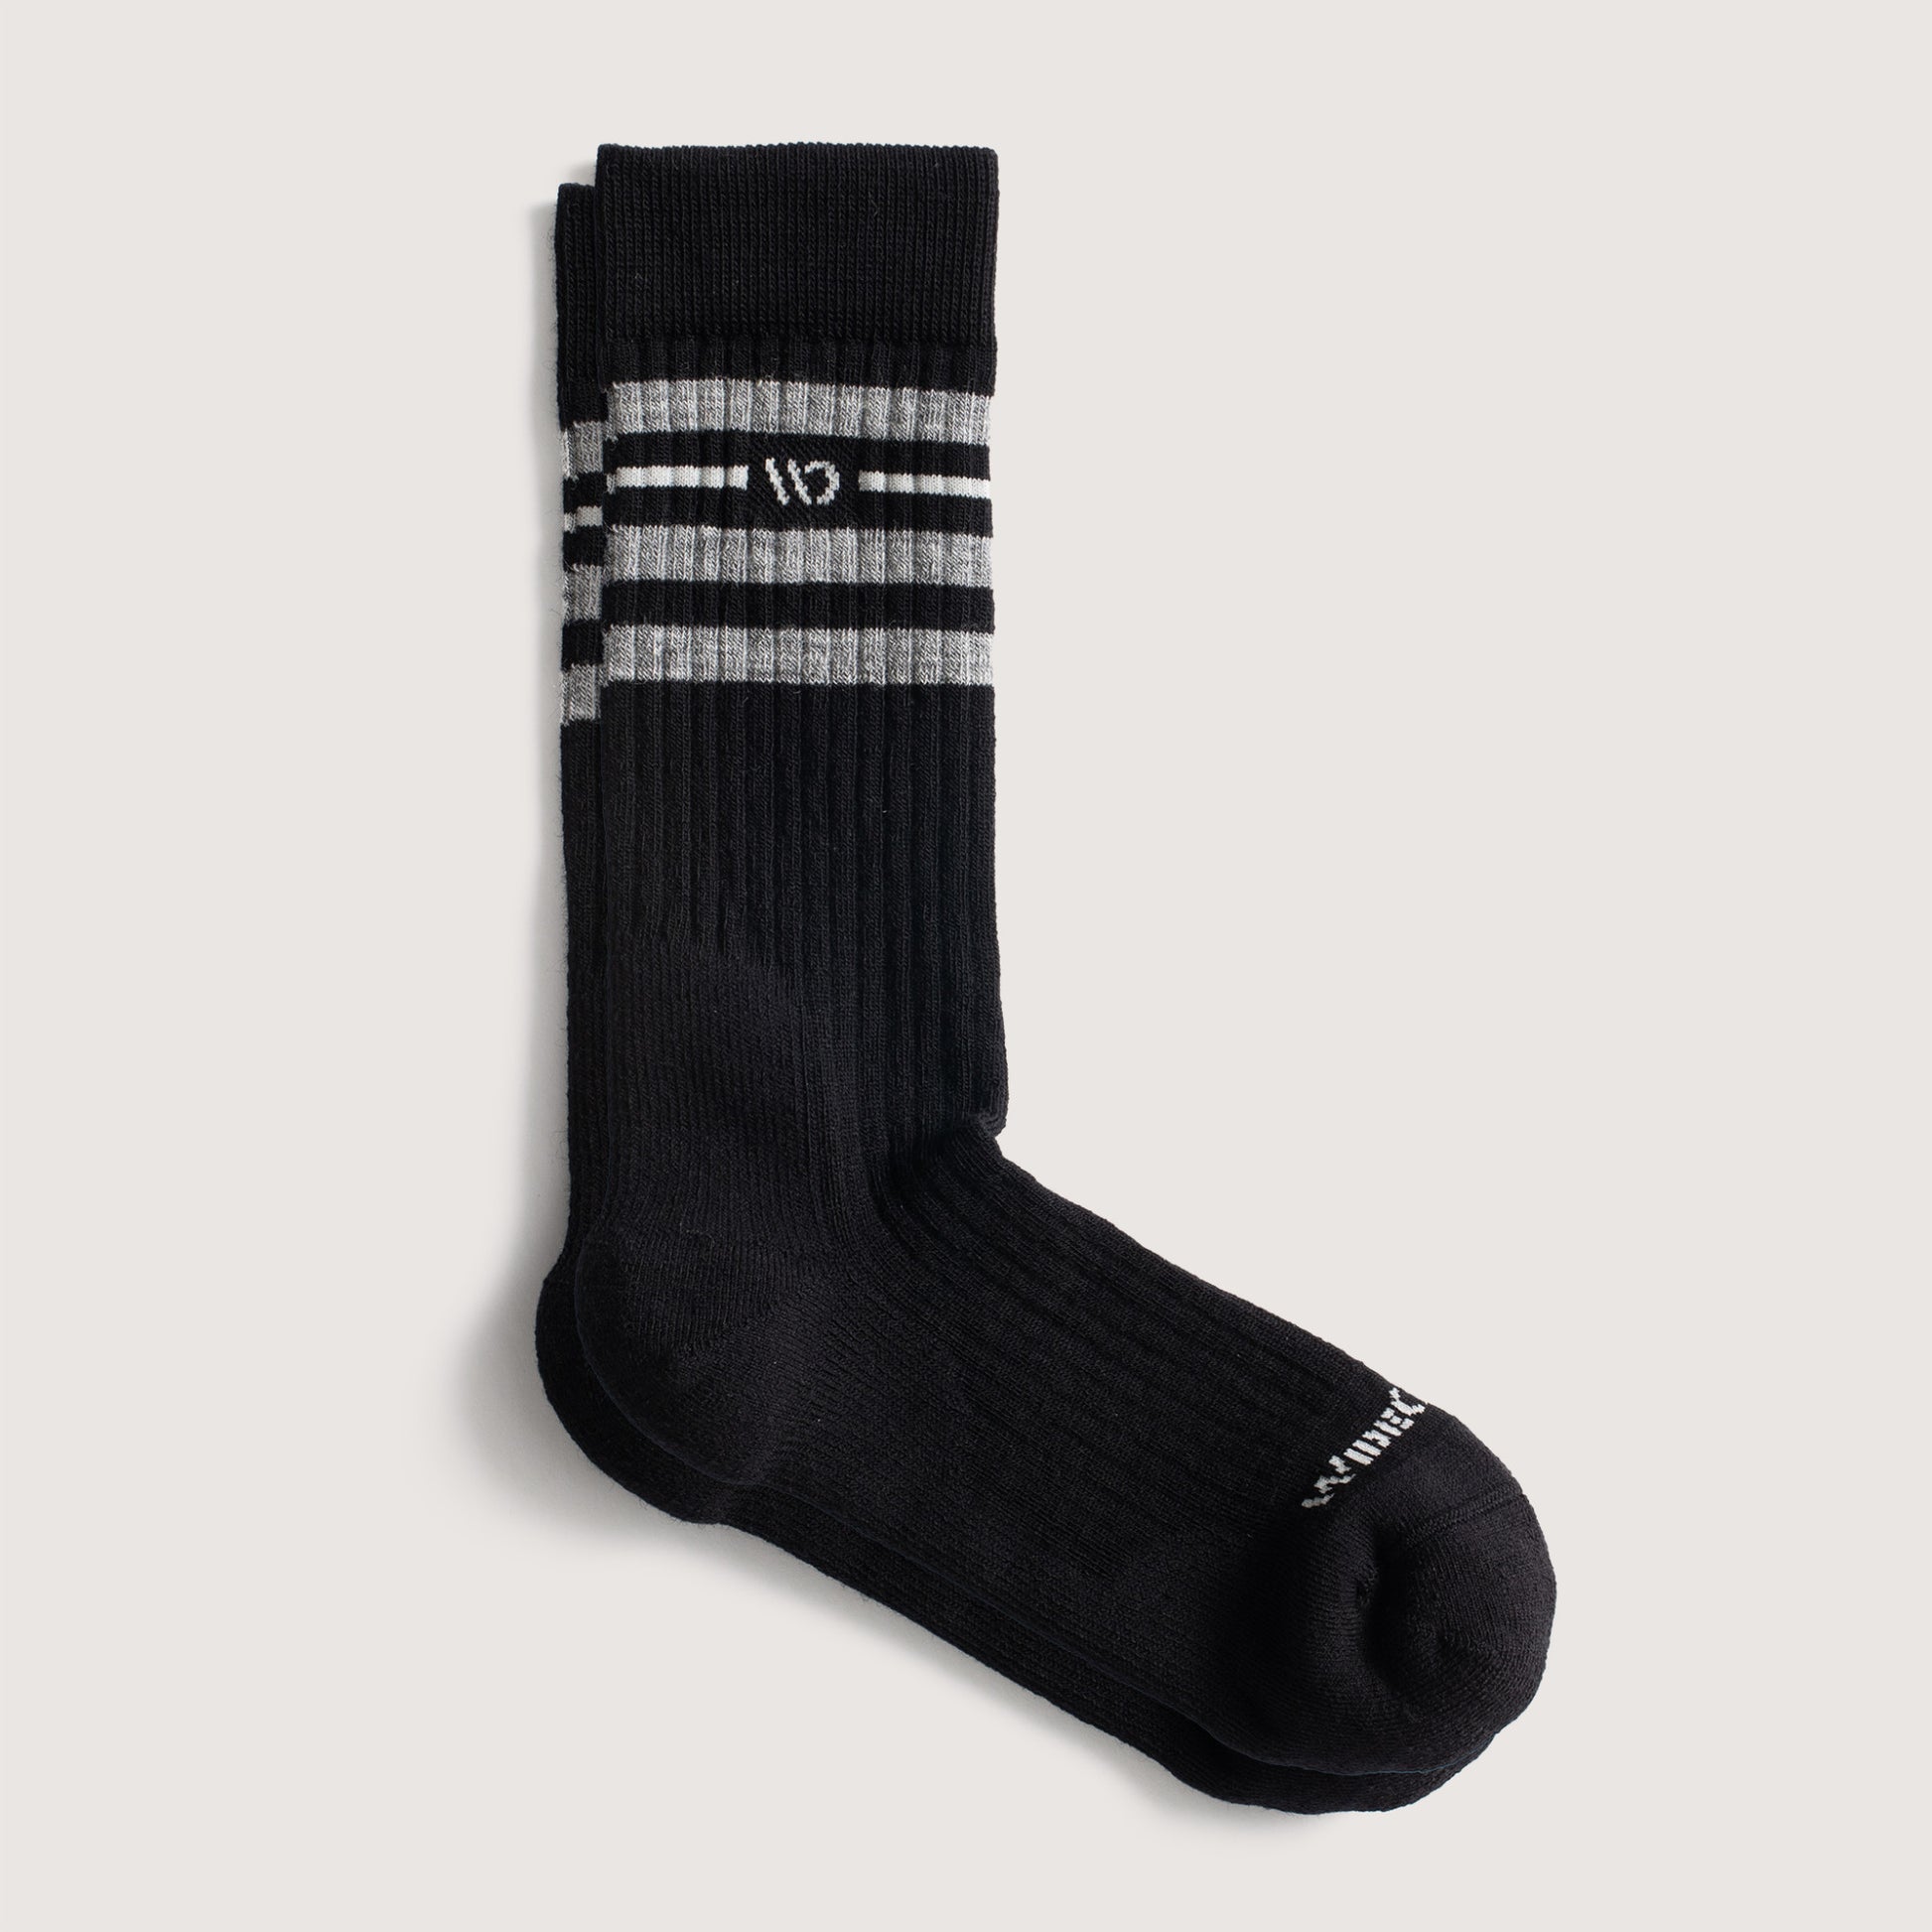 Flat socks, featuring white logo, with black body, and gray stripes below the cuff --Black